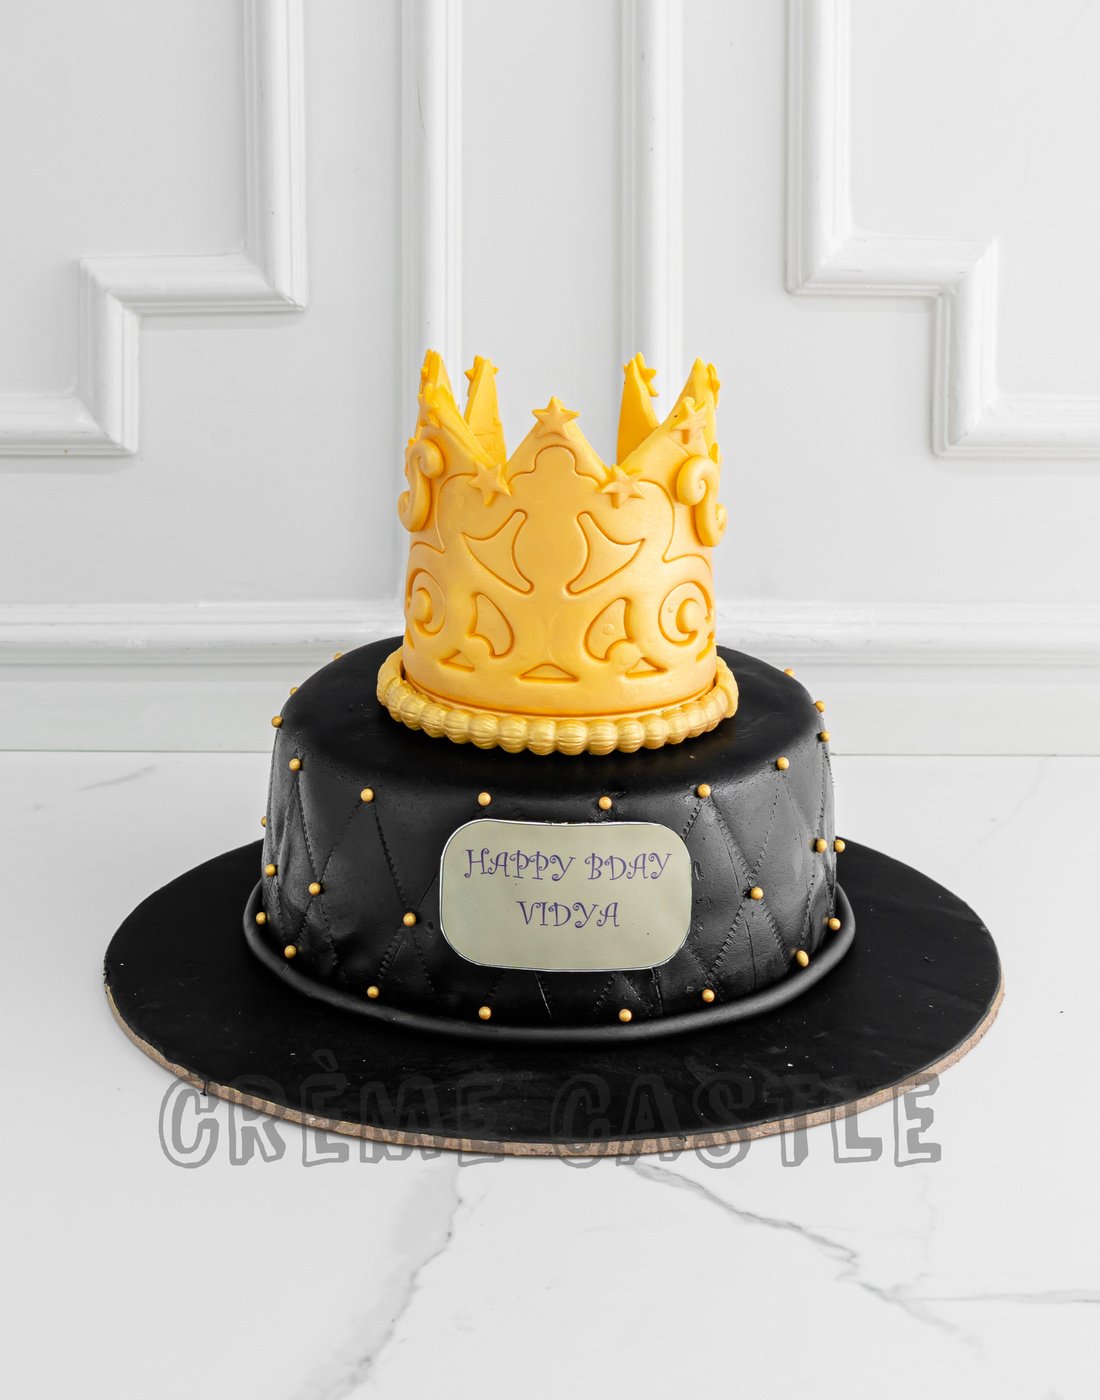 Discover 74+ crown theme cake latest